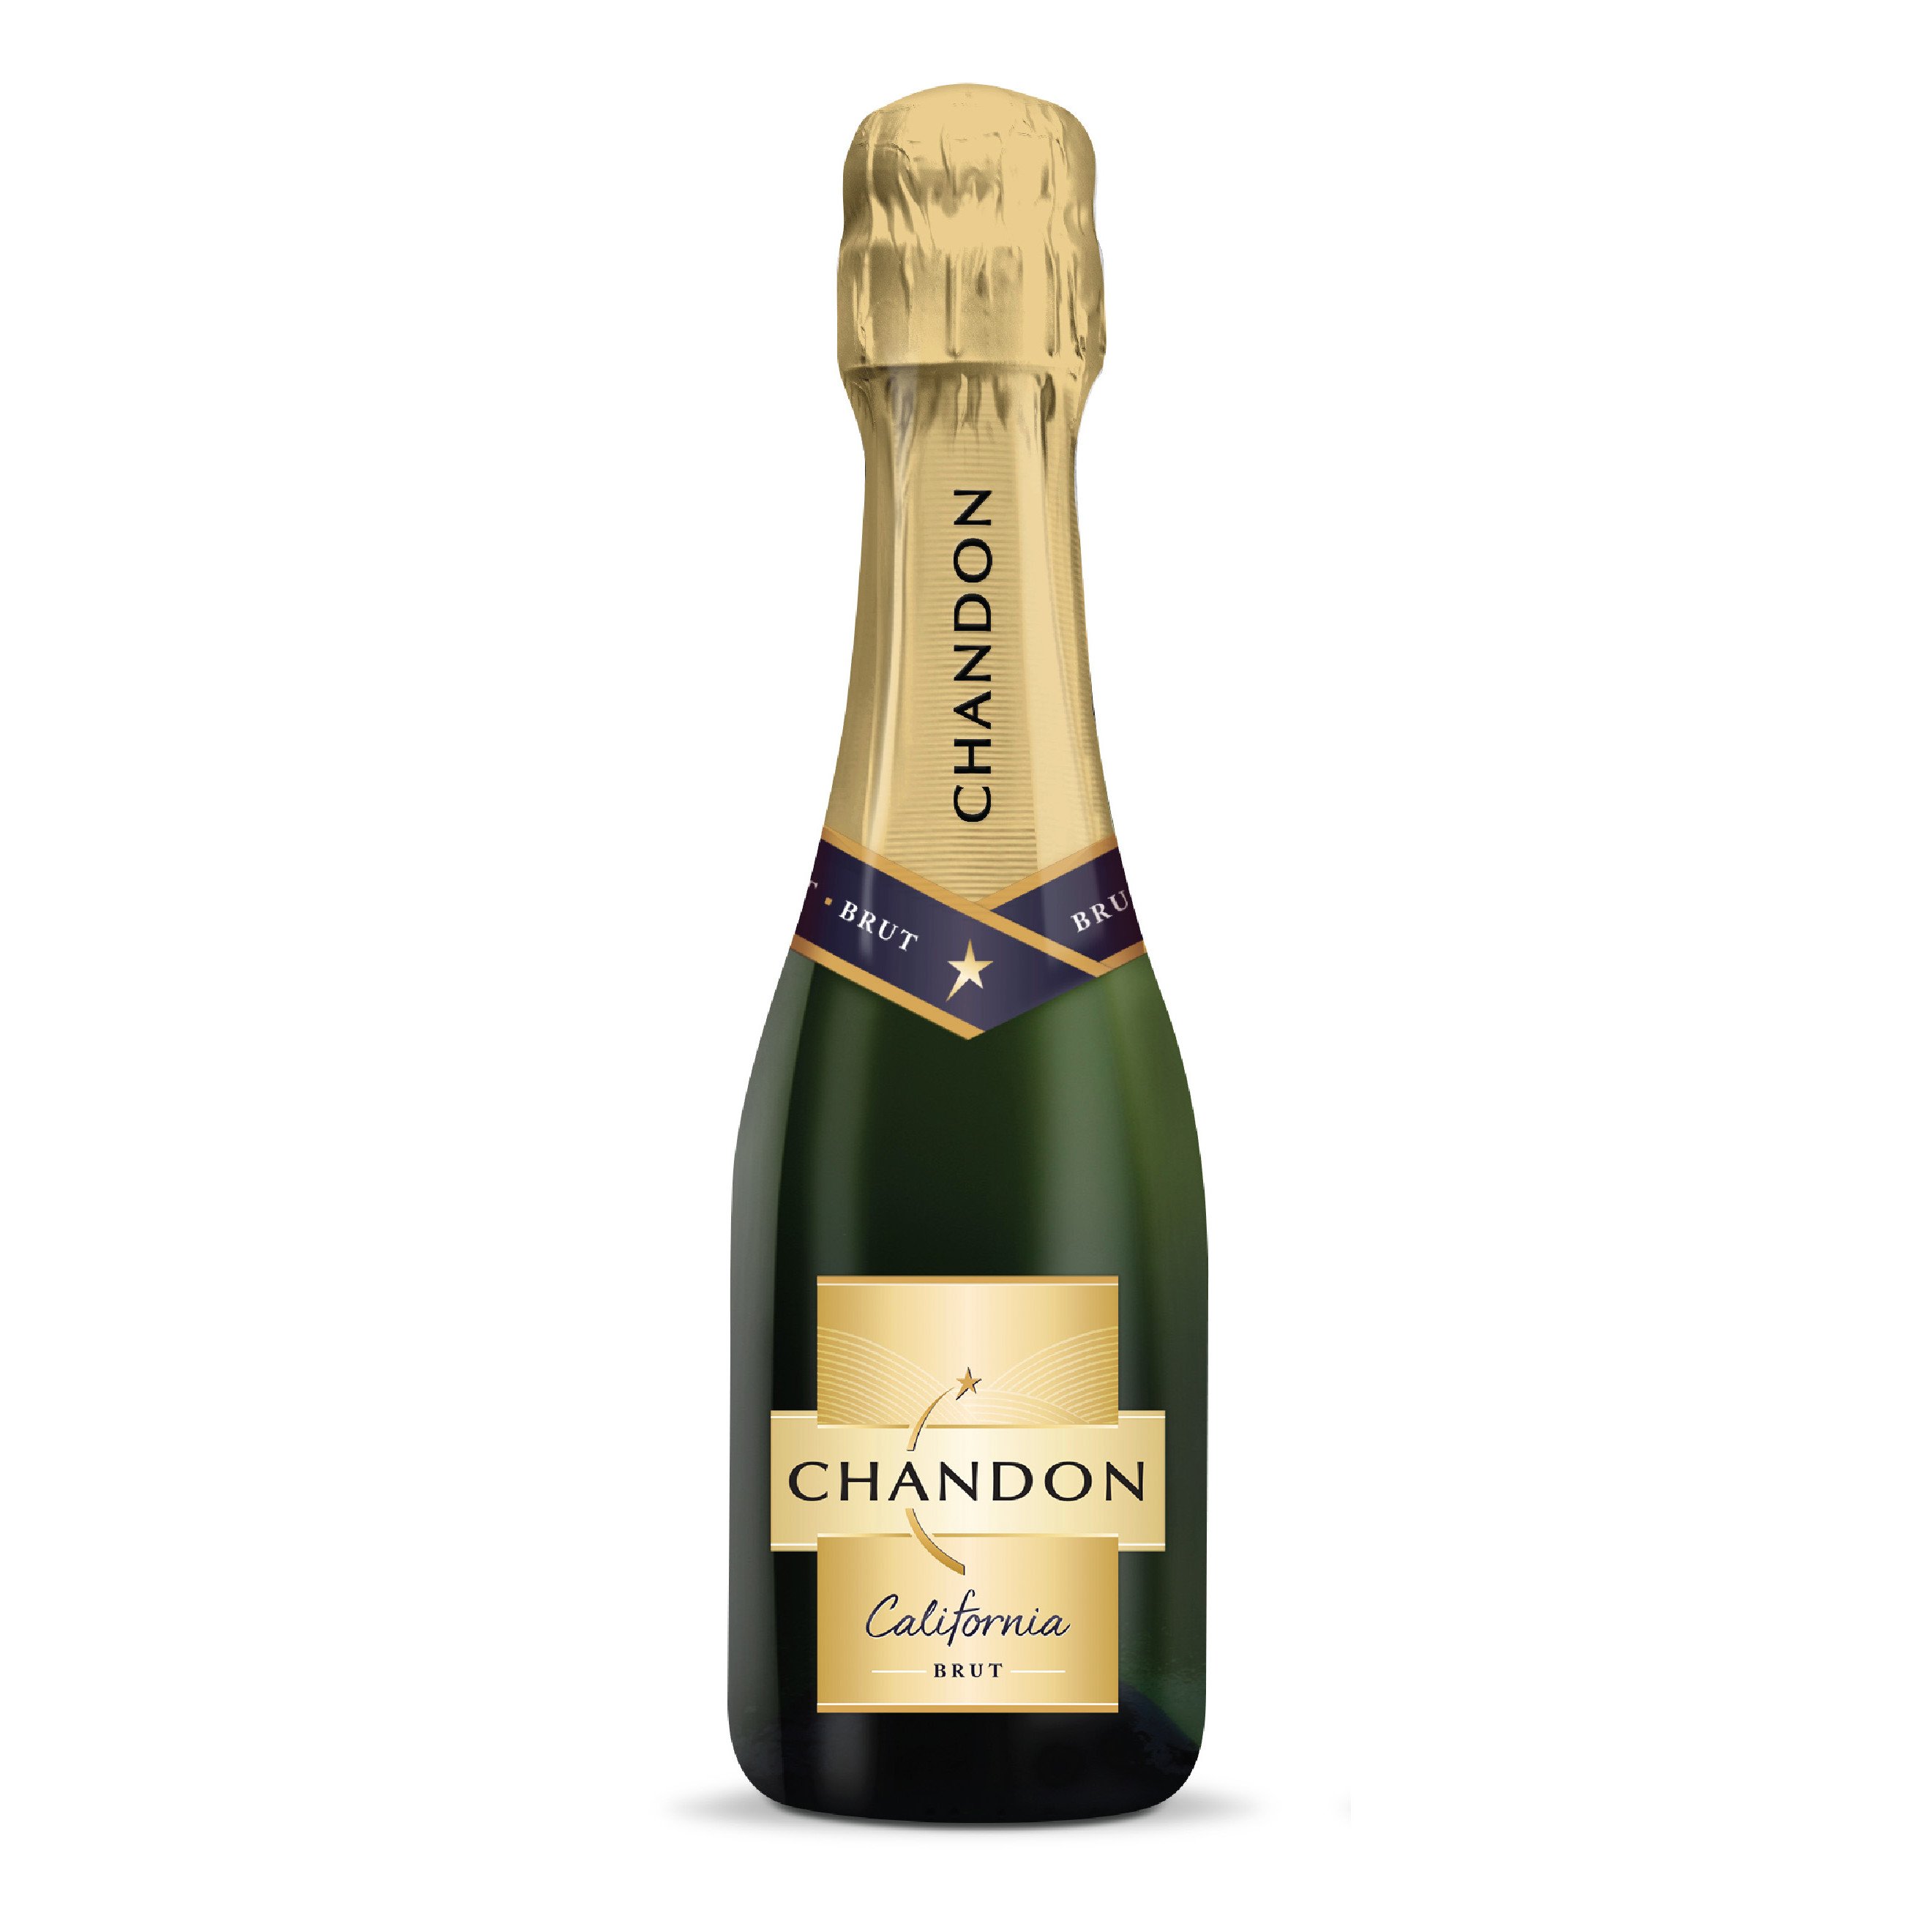 Catching Up at Domaine Chandon